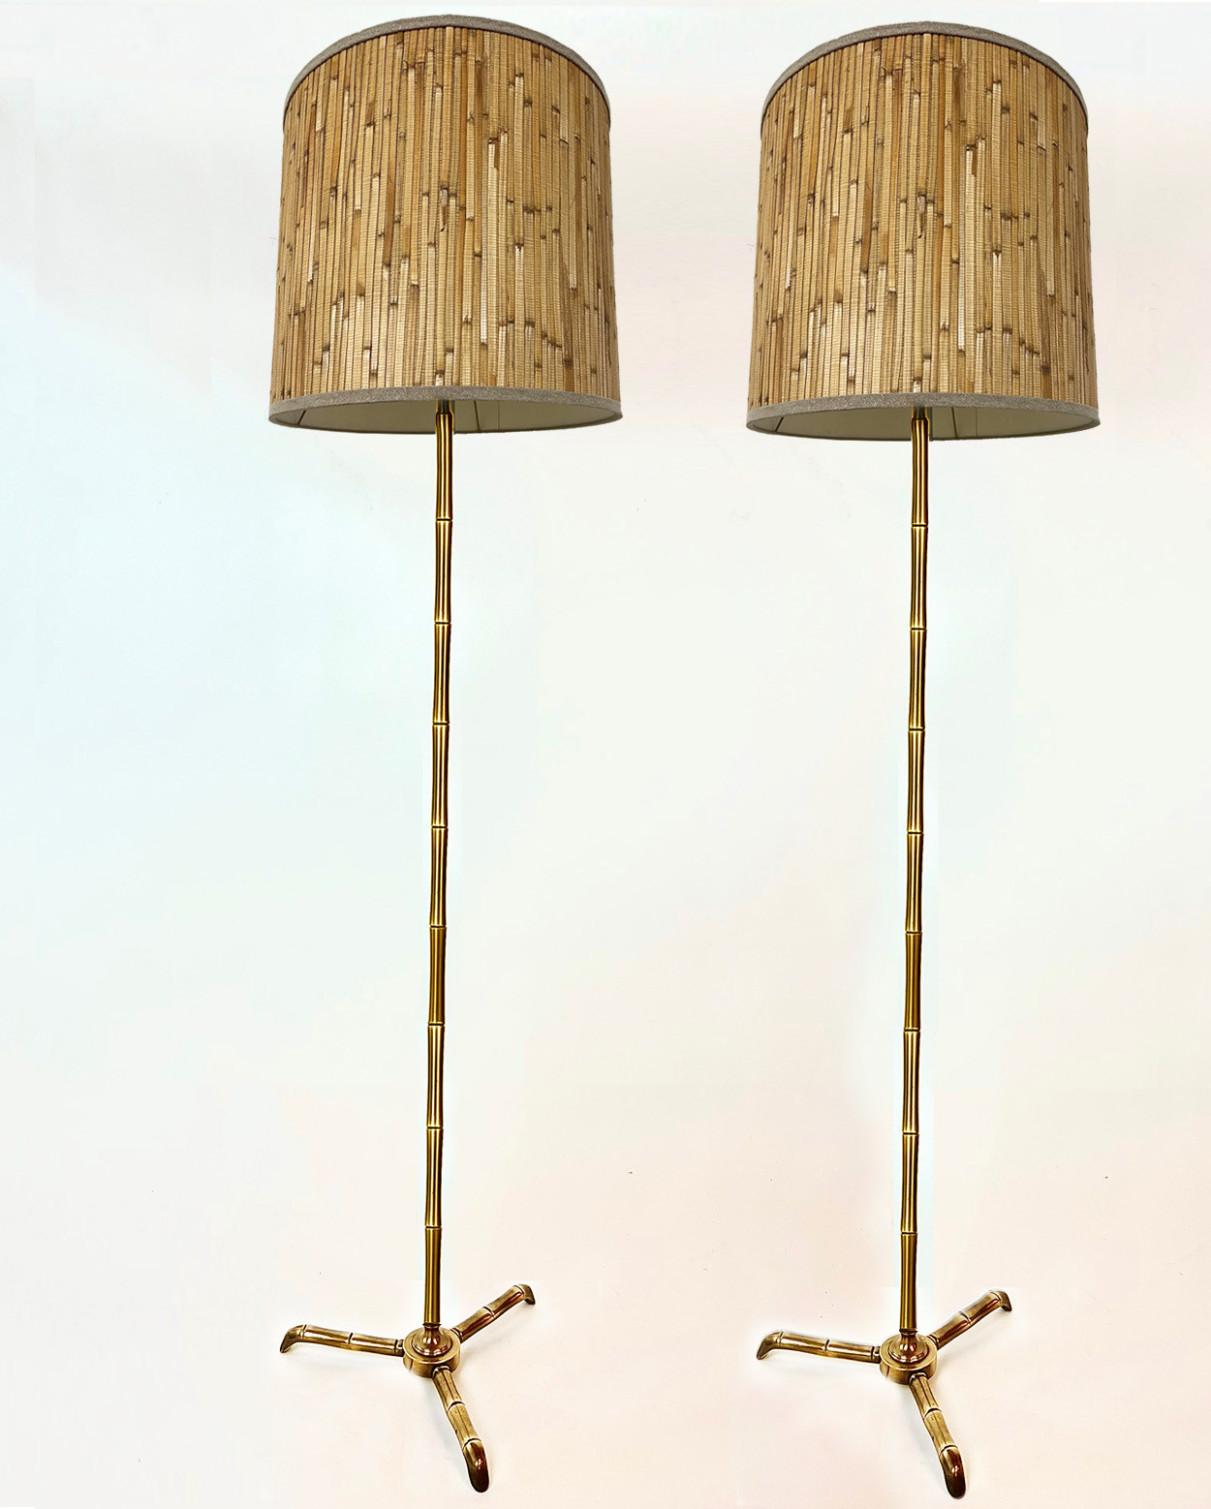 An early 20th century simulated bamboo brass standard lamp with a tripod base, attributed to Maison Baguès. Please note: bamboo lampshades included.
Also possible to buy without shades.

In very good vintage condition. We have not polished the